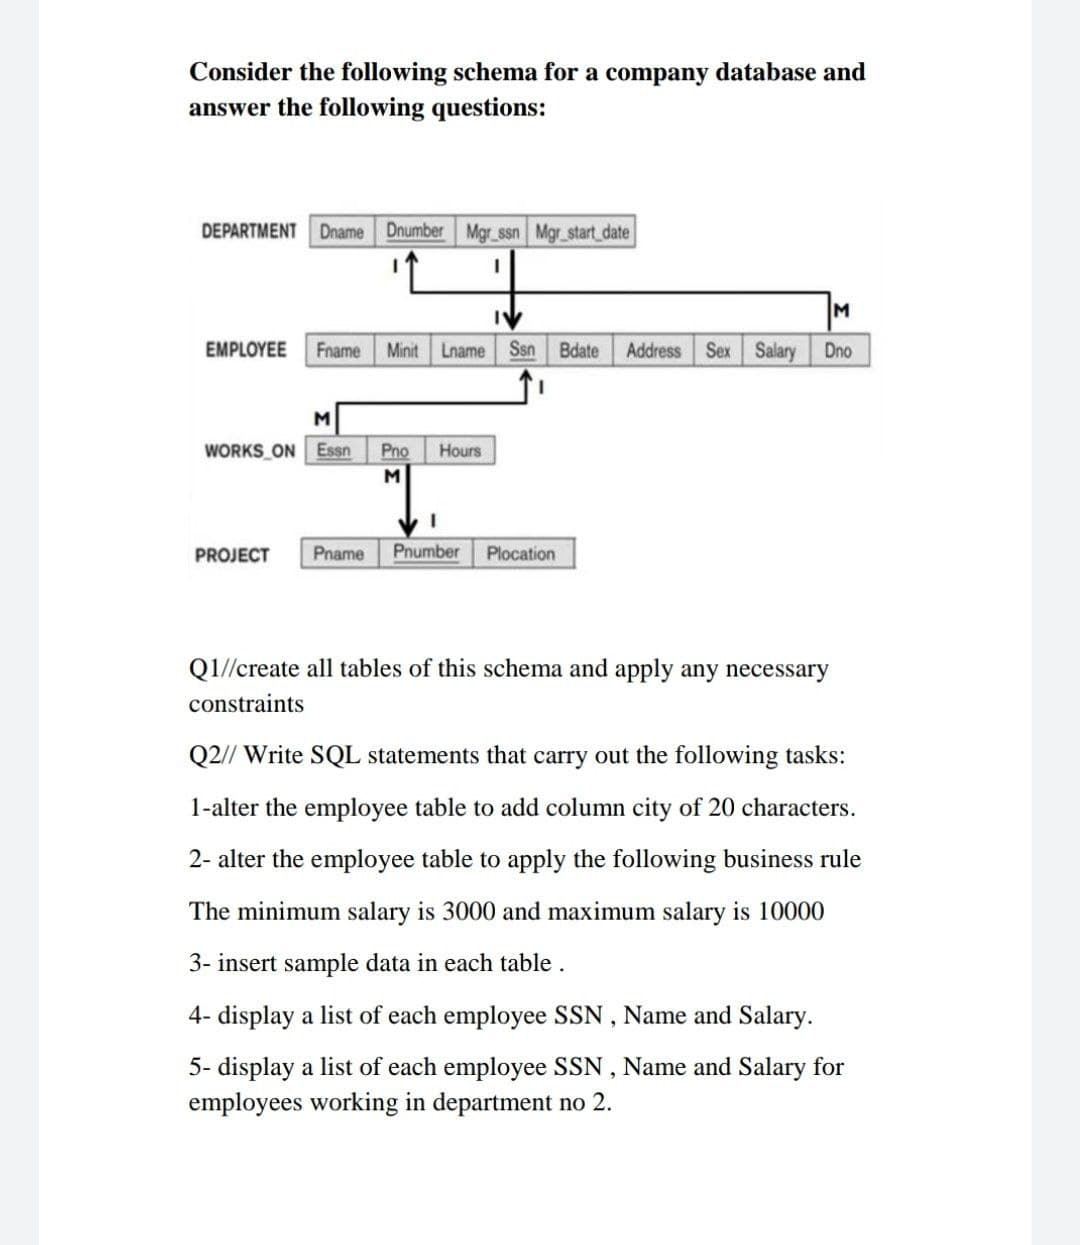 Consider the following schema for a company database and
answer the following questions:
DEPARTMENT Dname Dnumber Mgr_ssn Mgr start date
M
EMPLOYEE
Fname
Minit Lname Ssn
Bdate
Address
Sex Salary Dno
M
WORKS ON Essn
Pno
Hours
M
PROJECT
Pname
Pnumber
Plocation
Q1//create all tables of this schema and apply any necessary
constraints
Q2// Write SQL statements that carry out the following tasks:
1-alter the employee table to add column city of 20 characters.
2- alter the employee table to apply the following business rule
The minimum salary is 3000 and maximum salary is 10000
3- insert sample data in each table.
4- display a list of each employee SSN , Name and Salary.
5- display a list of each employee SSN, Name and Salary for
employees working in department no 2.
